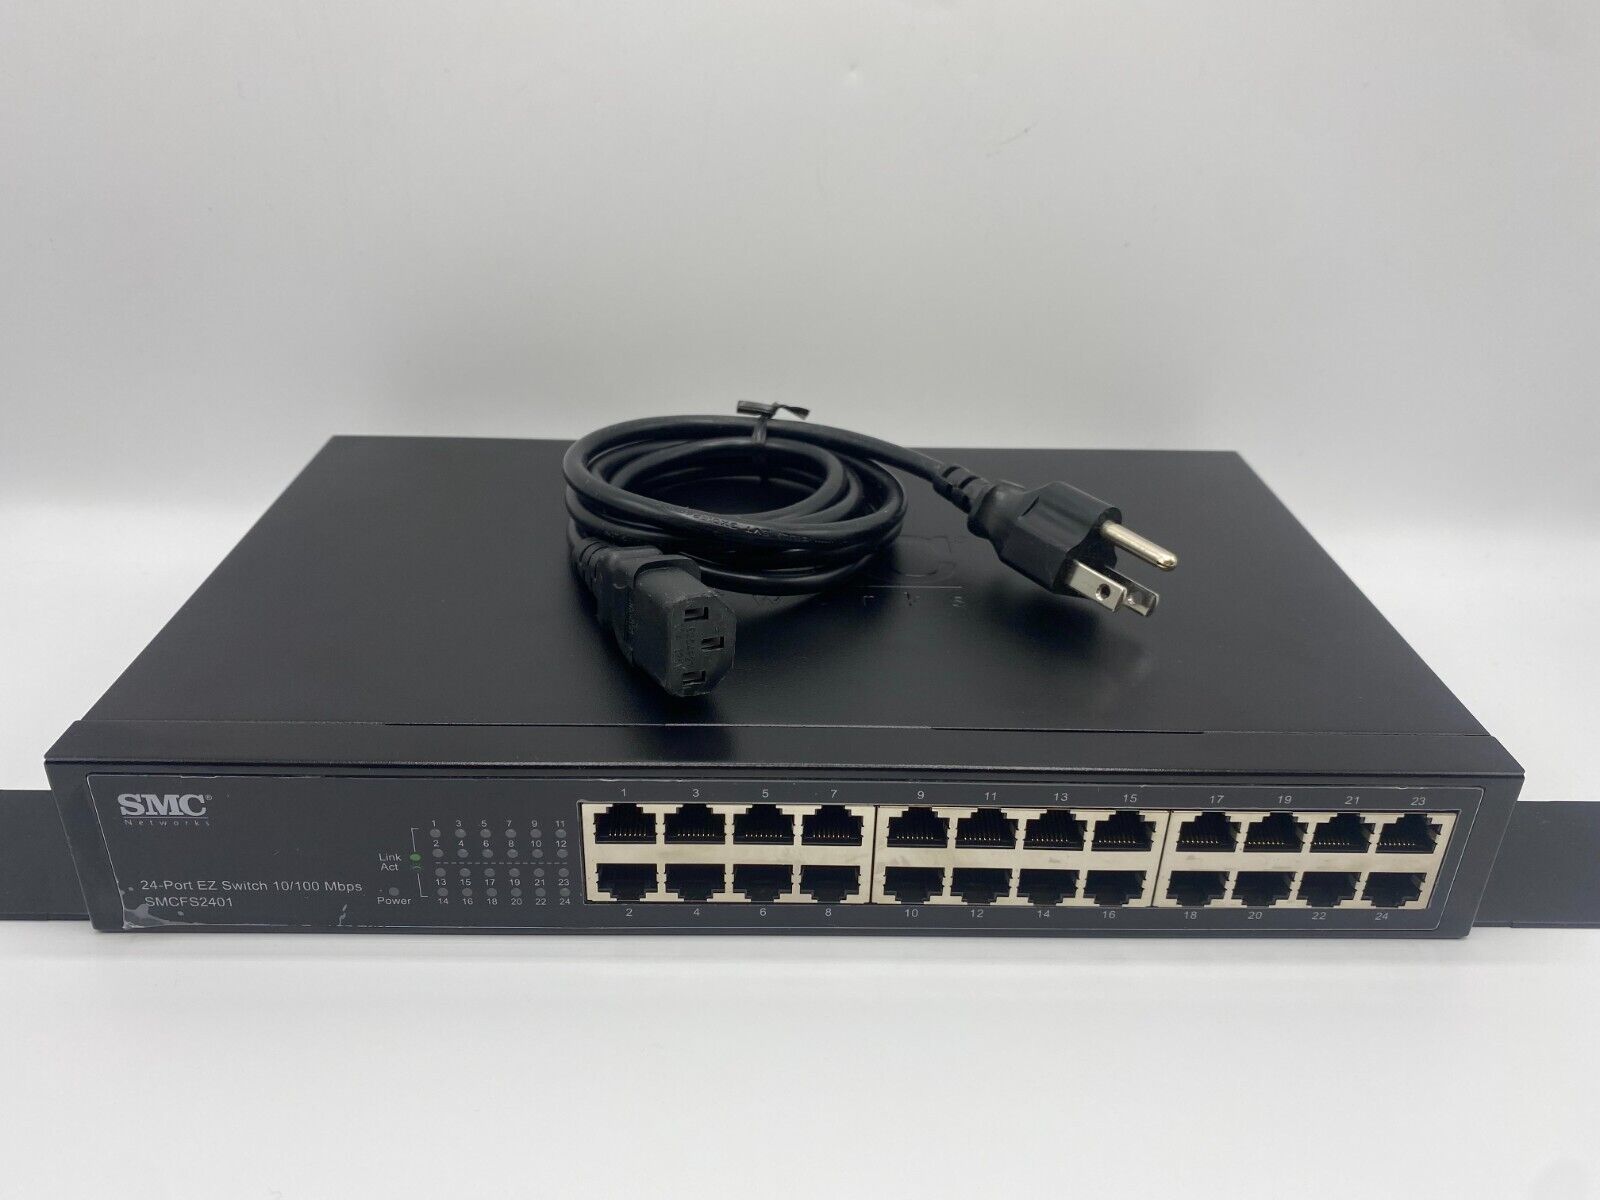 SMC Networks EZ Switch SMCFS2401 Ethernet Switch 24 Ports 2 Layer Supported